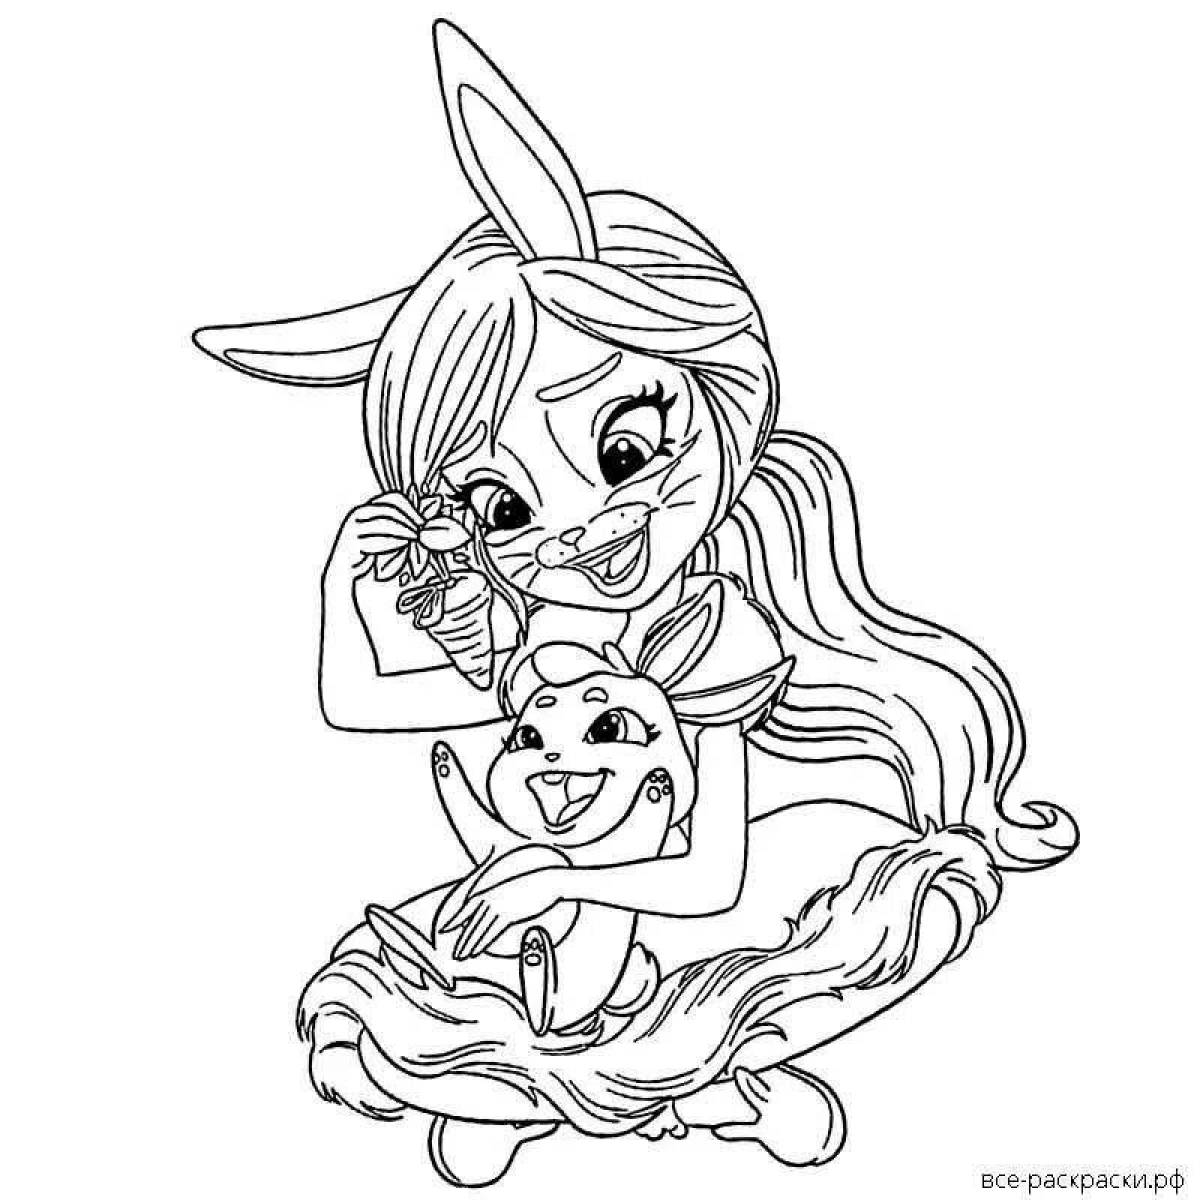 Photo Felicity's amazing coloring page